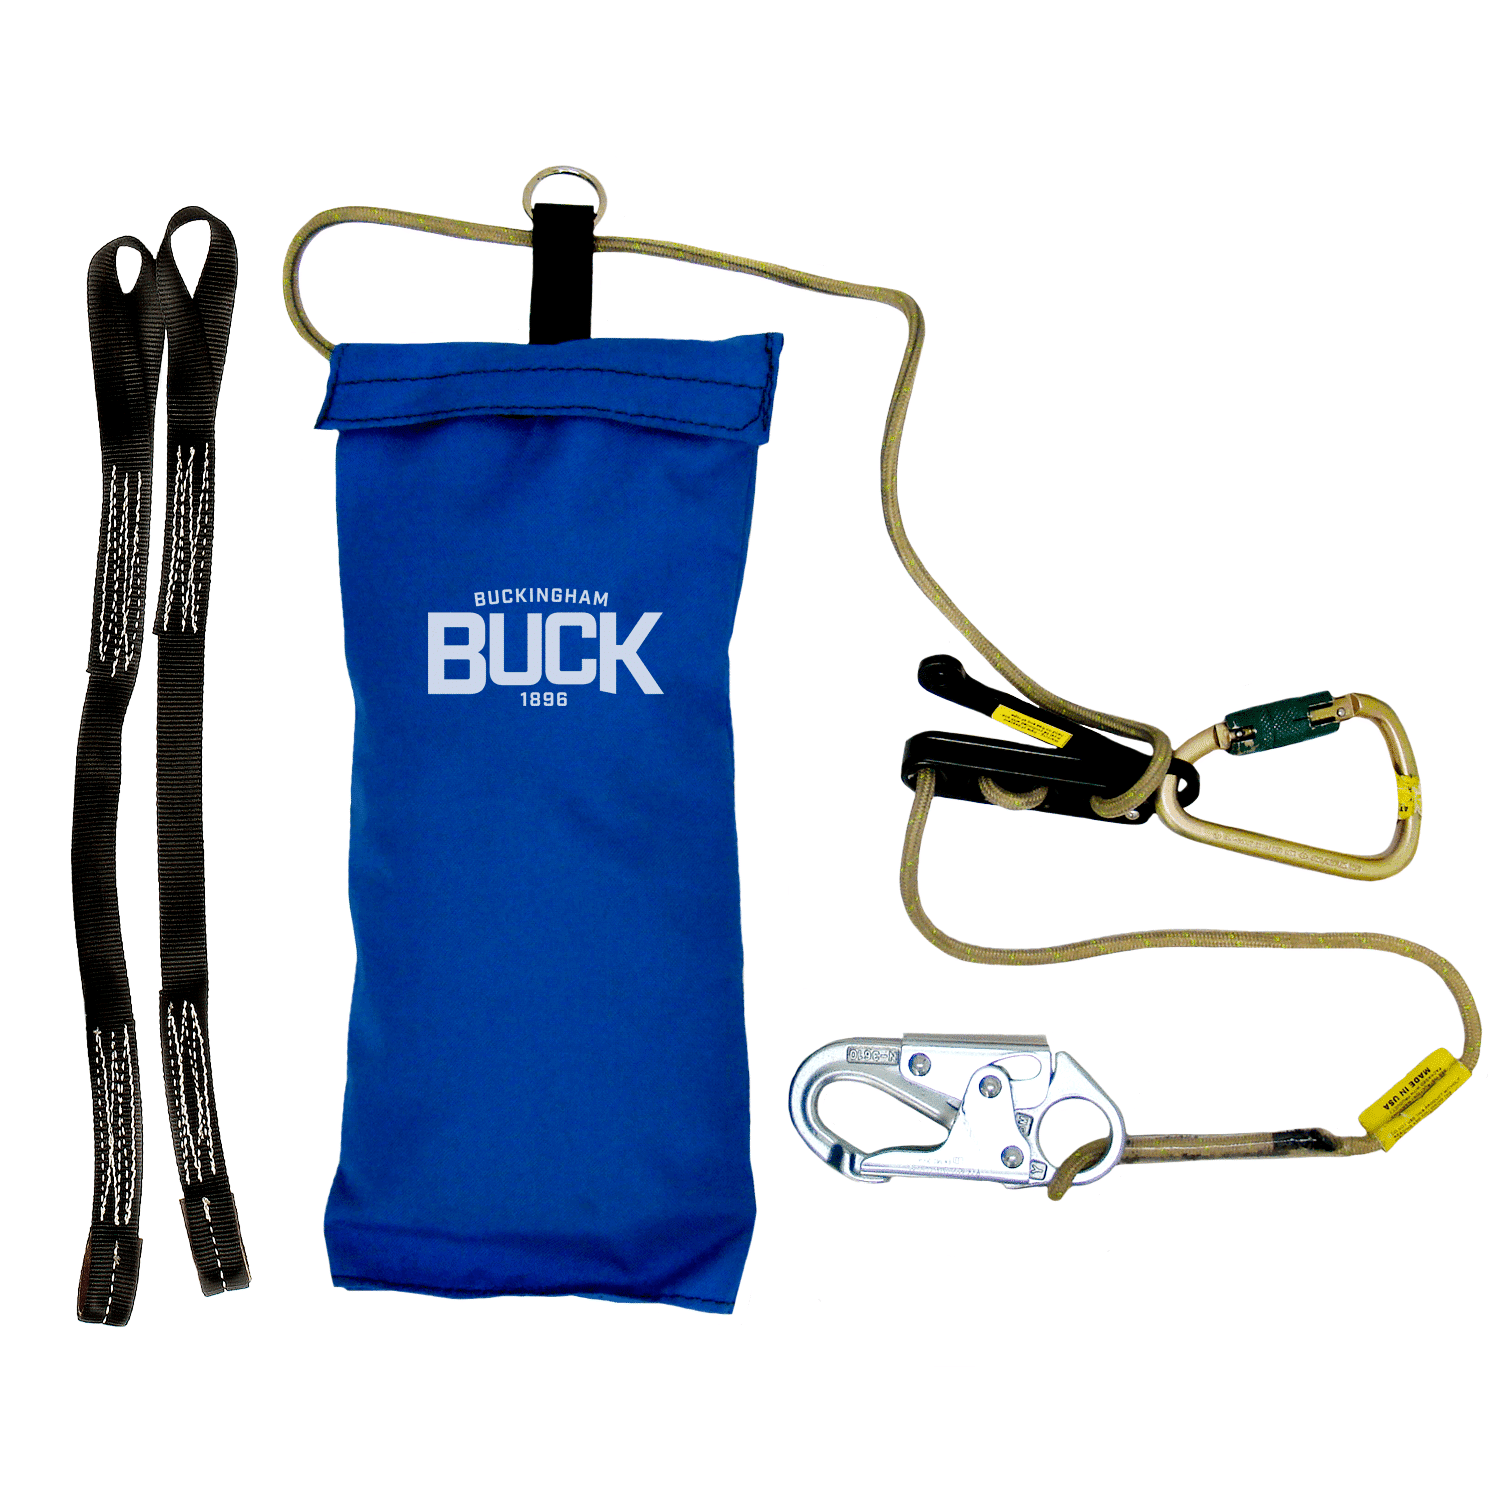 Buckingham Self-Rescue System from Columbia Safety